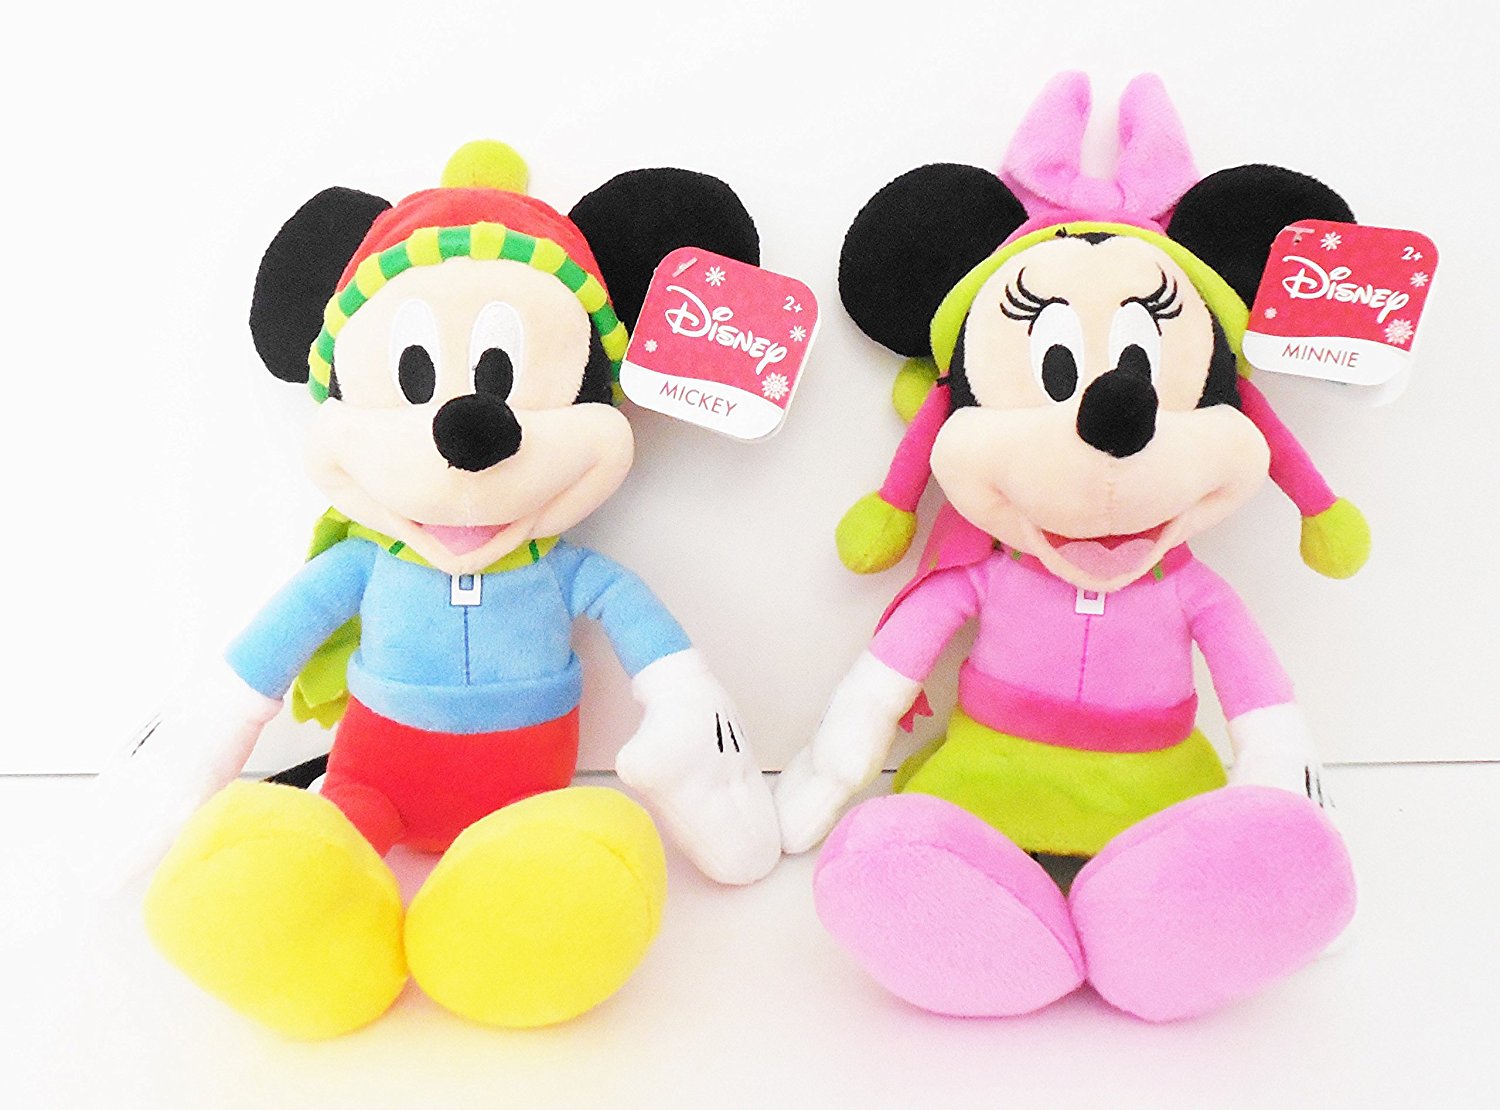 Soft and Cuddly Mickey and Minnie Plush Toy Pair